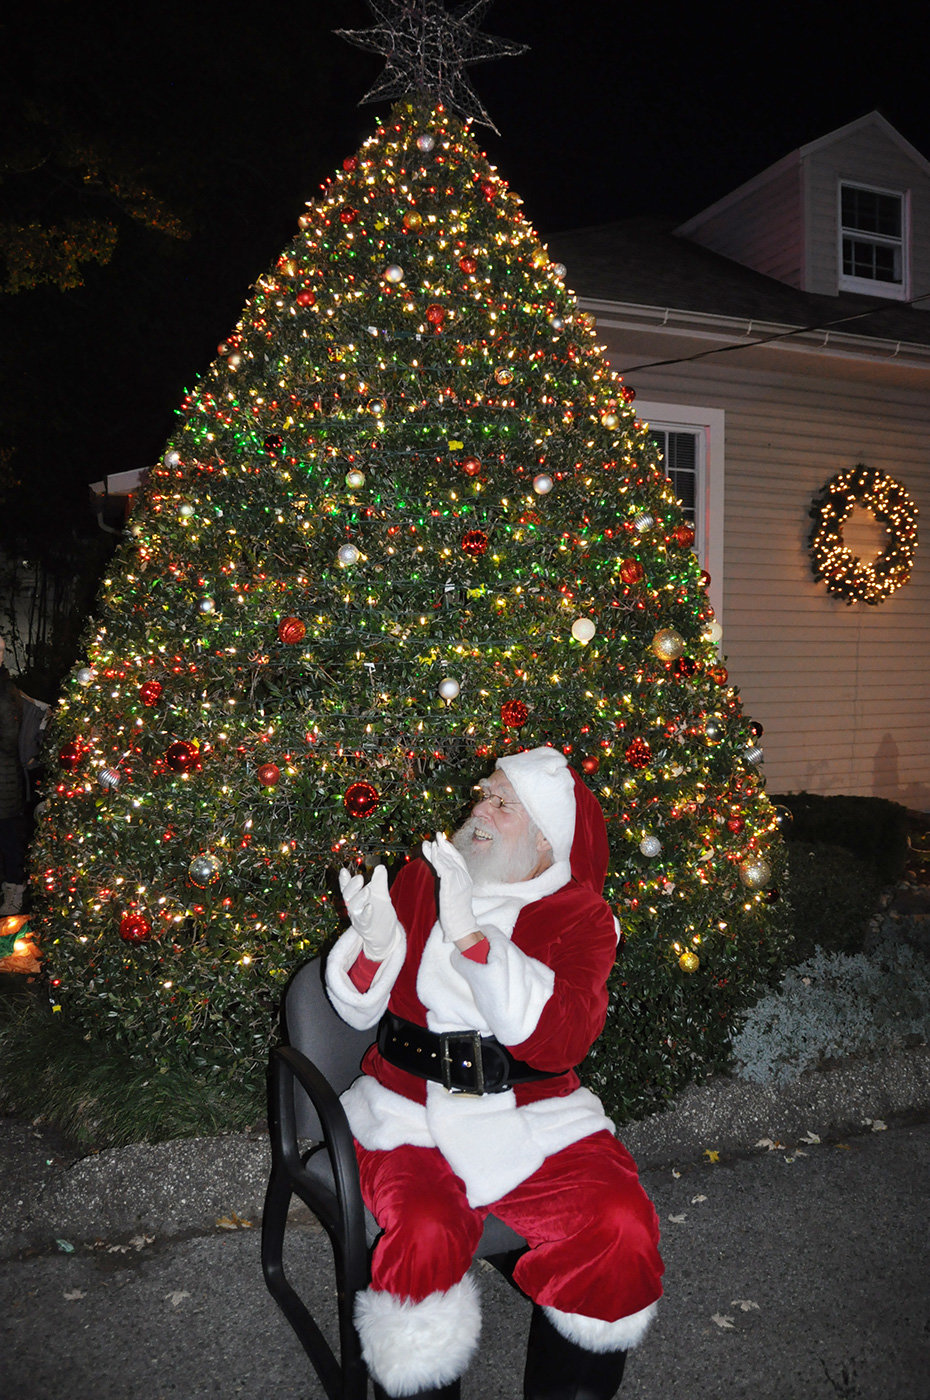 Dressed as Santa, Freeman Bagnall applauded when the holly tree was lit.